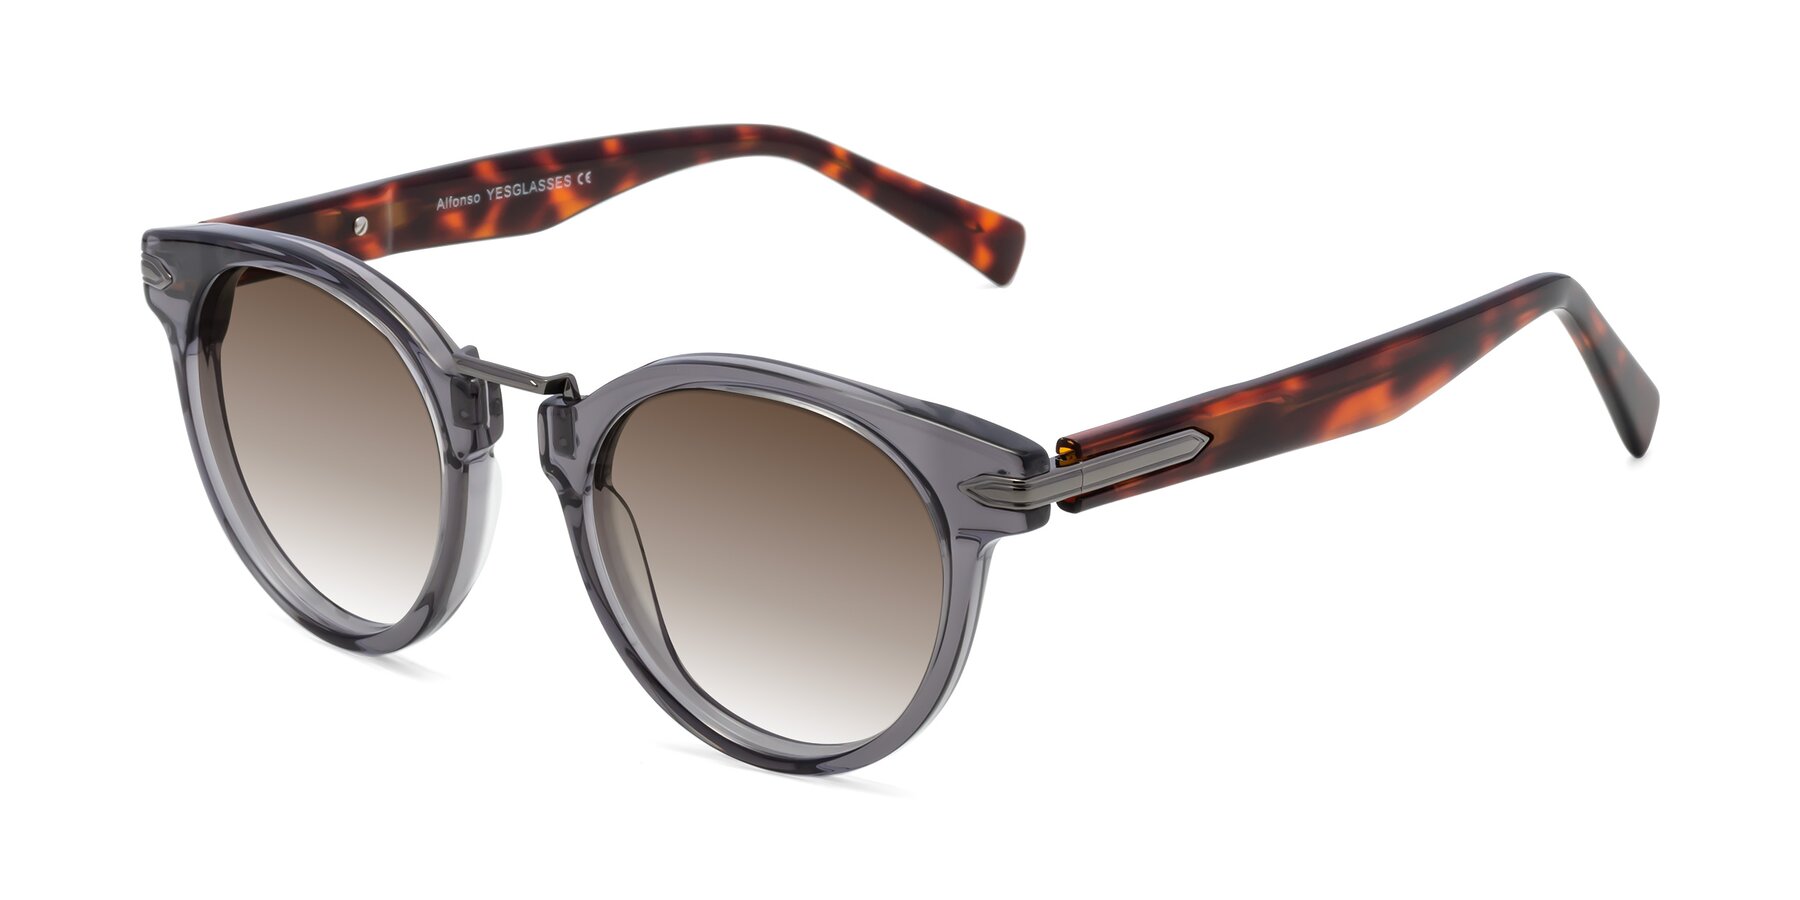 Angle of Alfonso in Gray /Tortoise with Brown Gradient Lenses